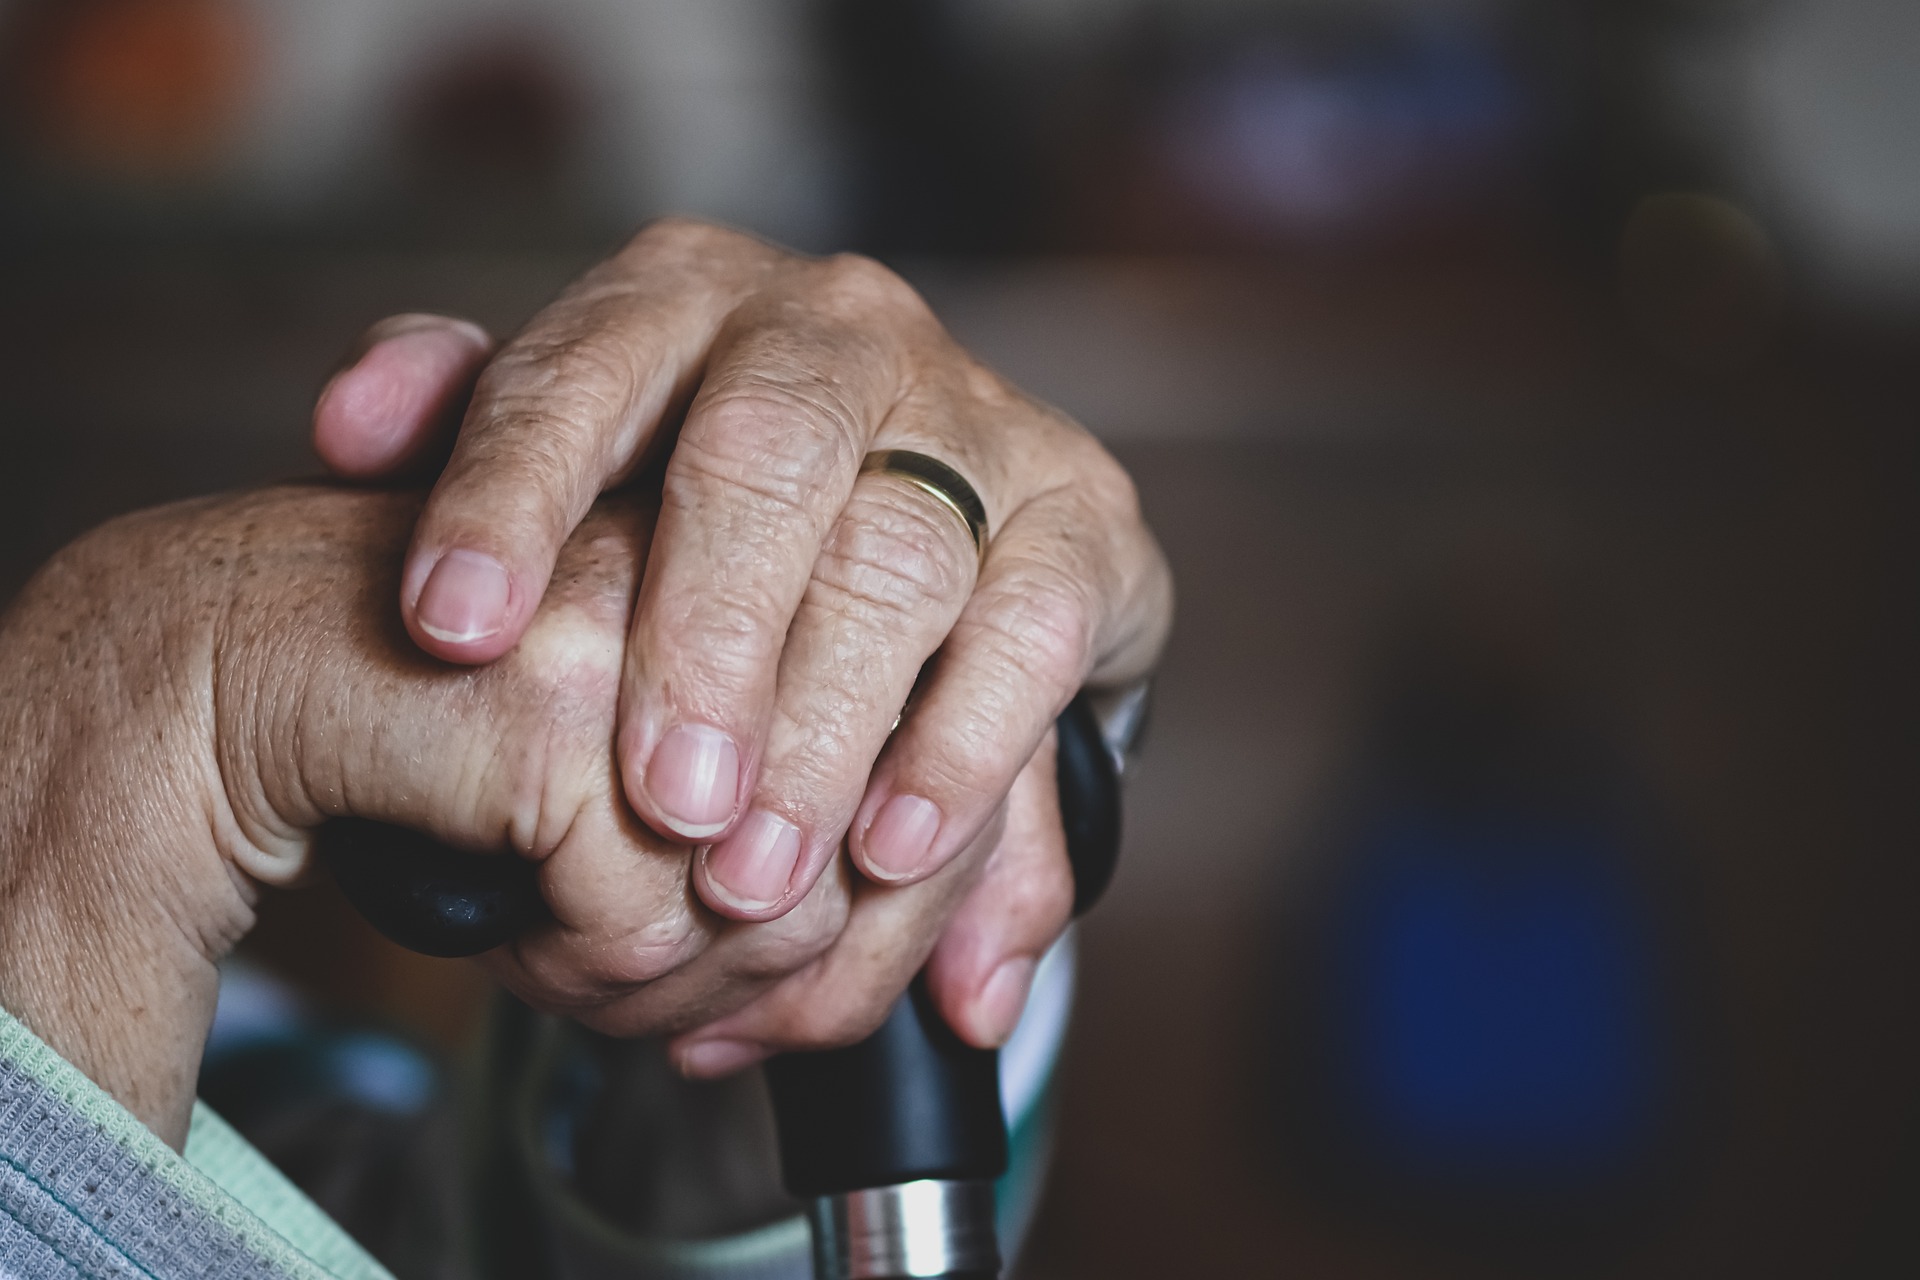 A close-up on the hands of an elderly person. The hands are on a cane.